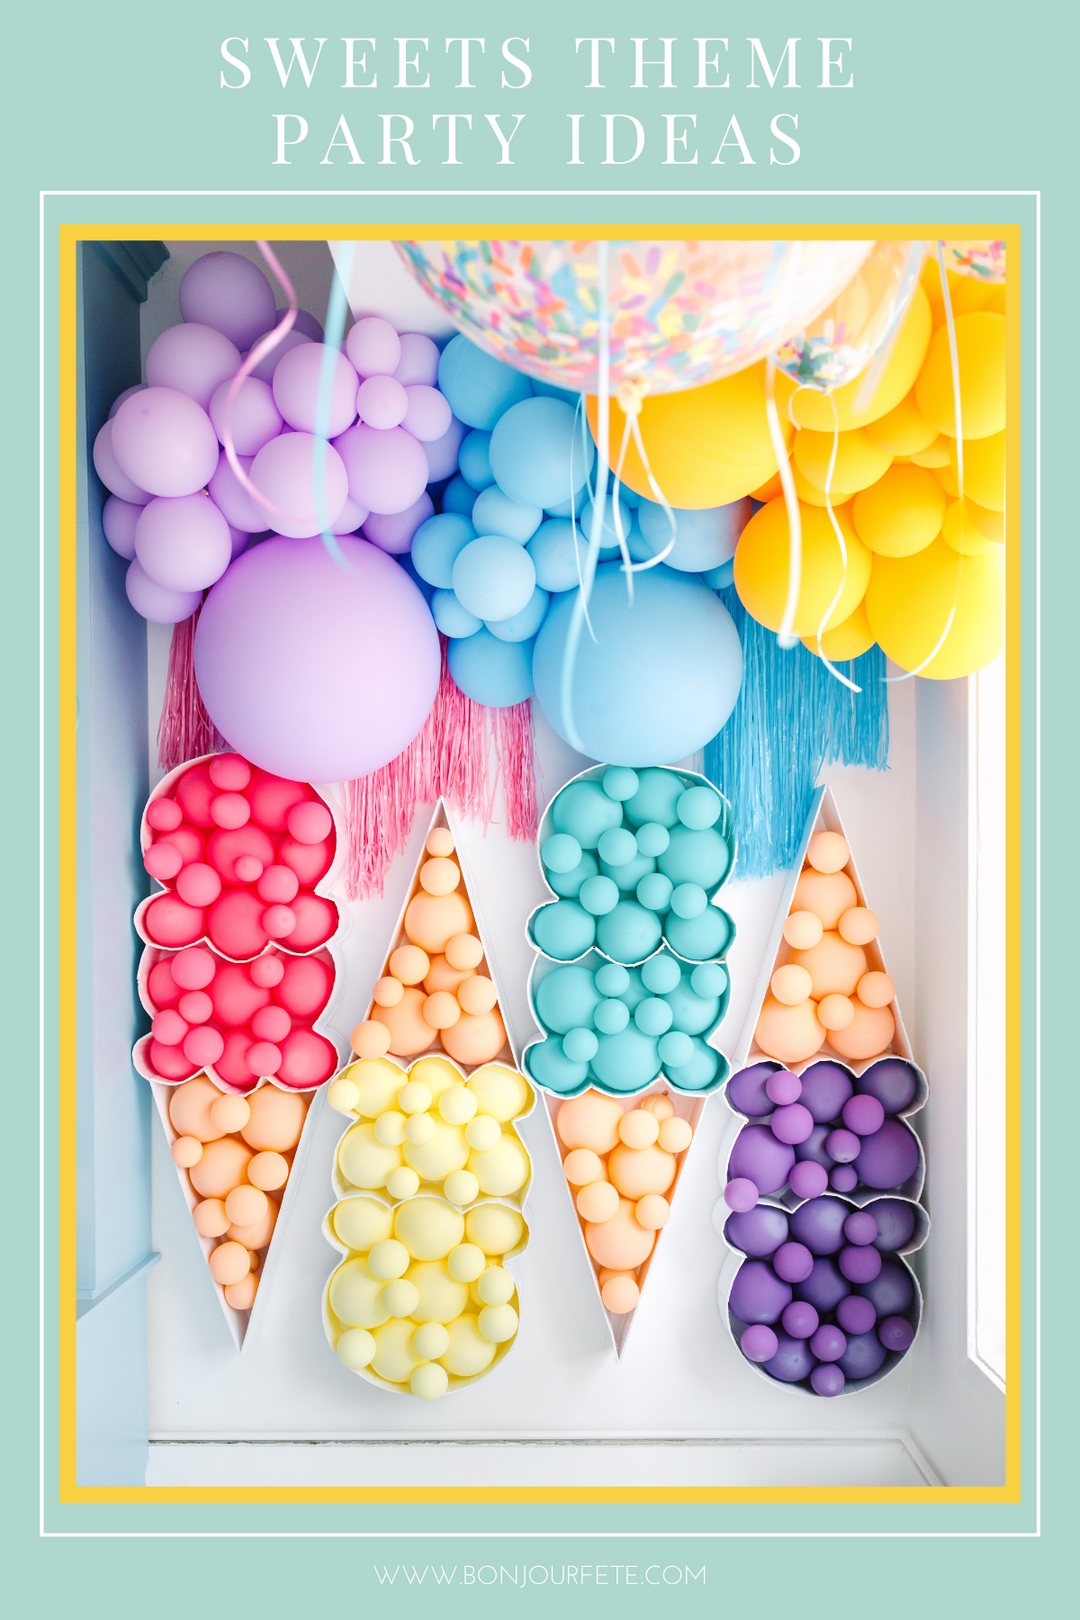 HOW TO THROW A DELICIOUS SWEETS THEMED BIRTHDAY PARTY